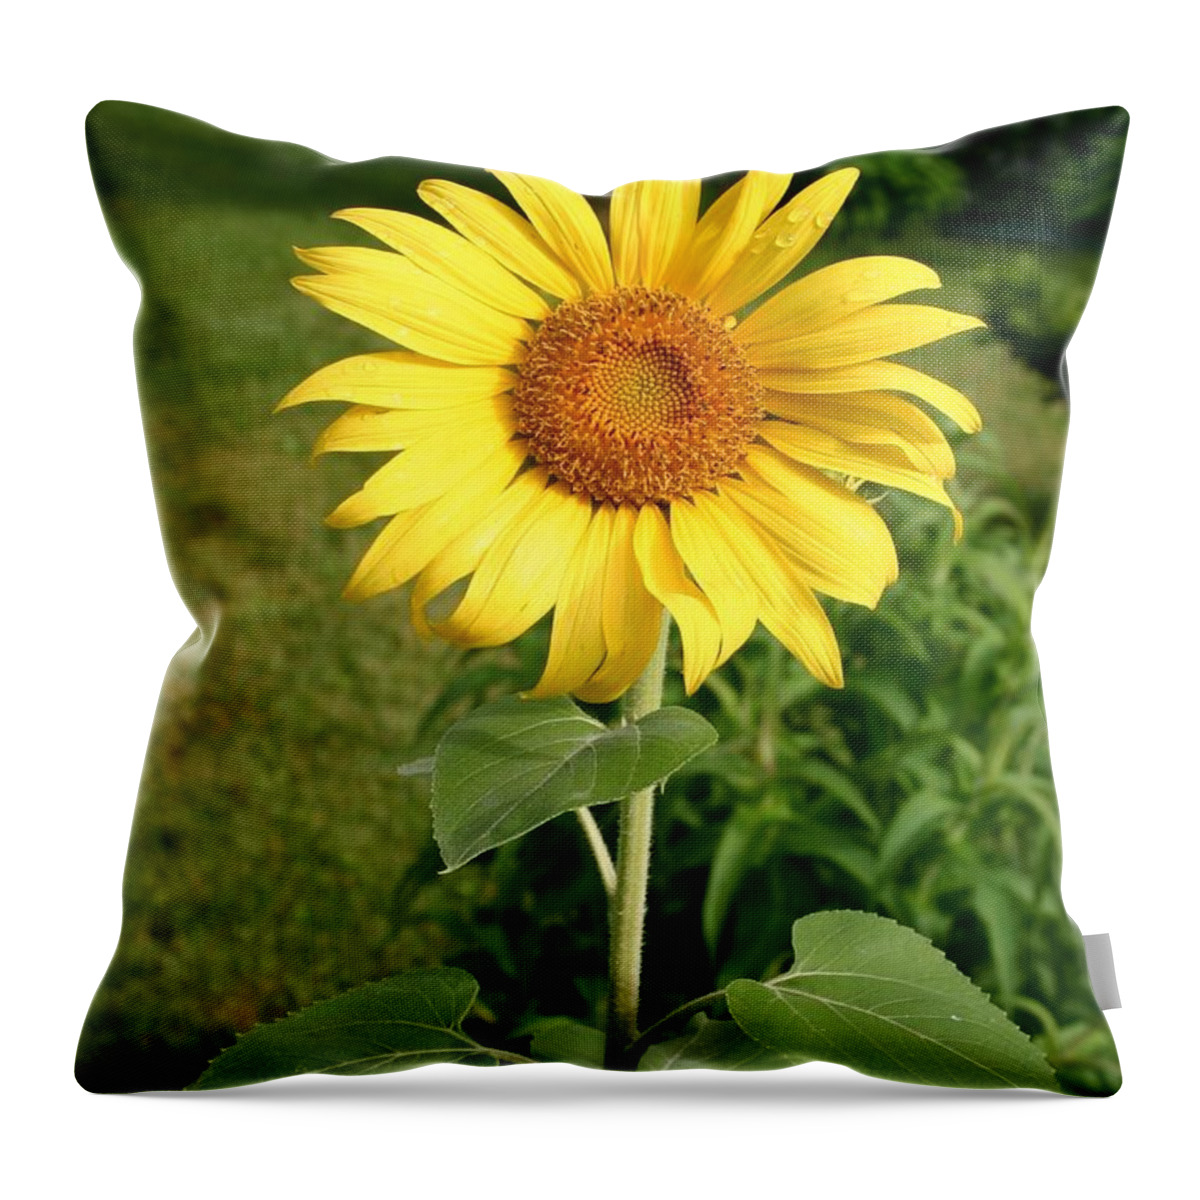 Sunflower Throw Pillow featuring the photograph Sunflower With Raindrops by Robert E Alter Reflections of Infinity